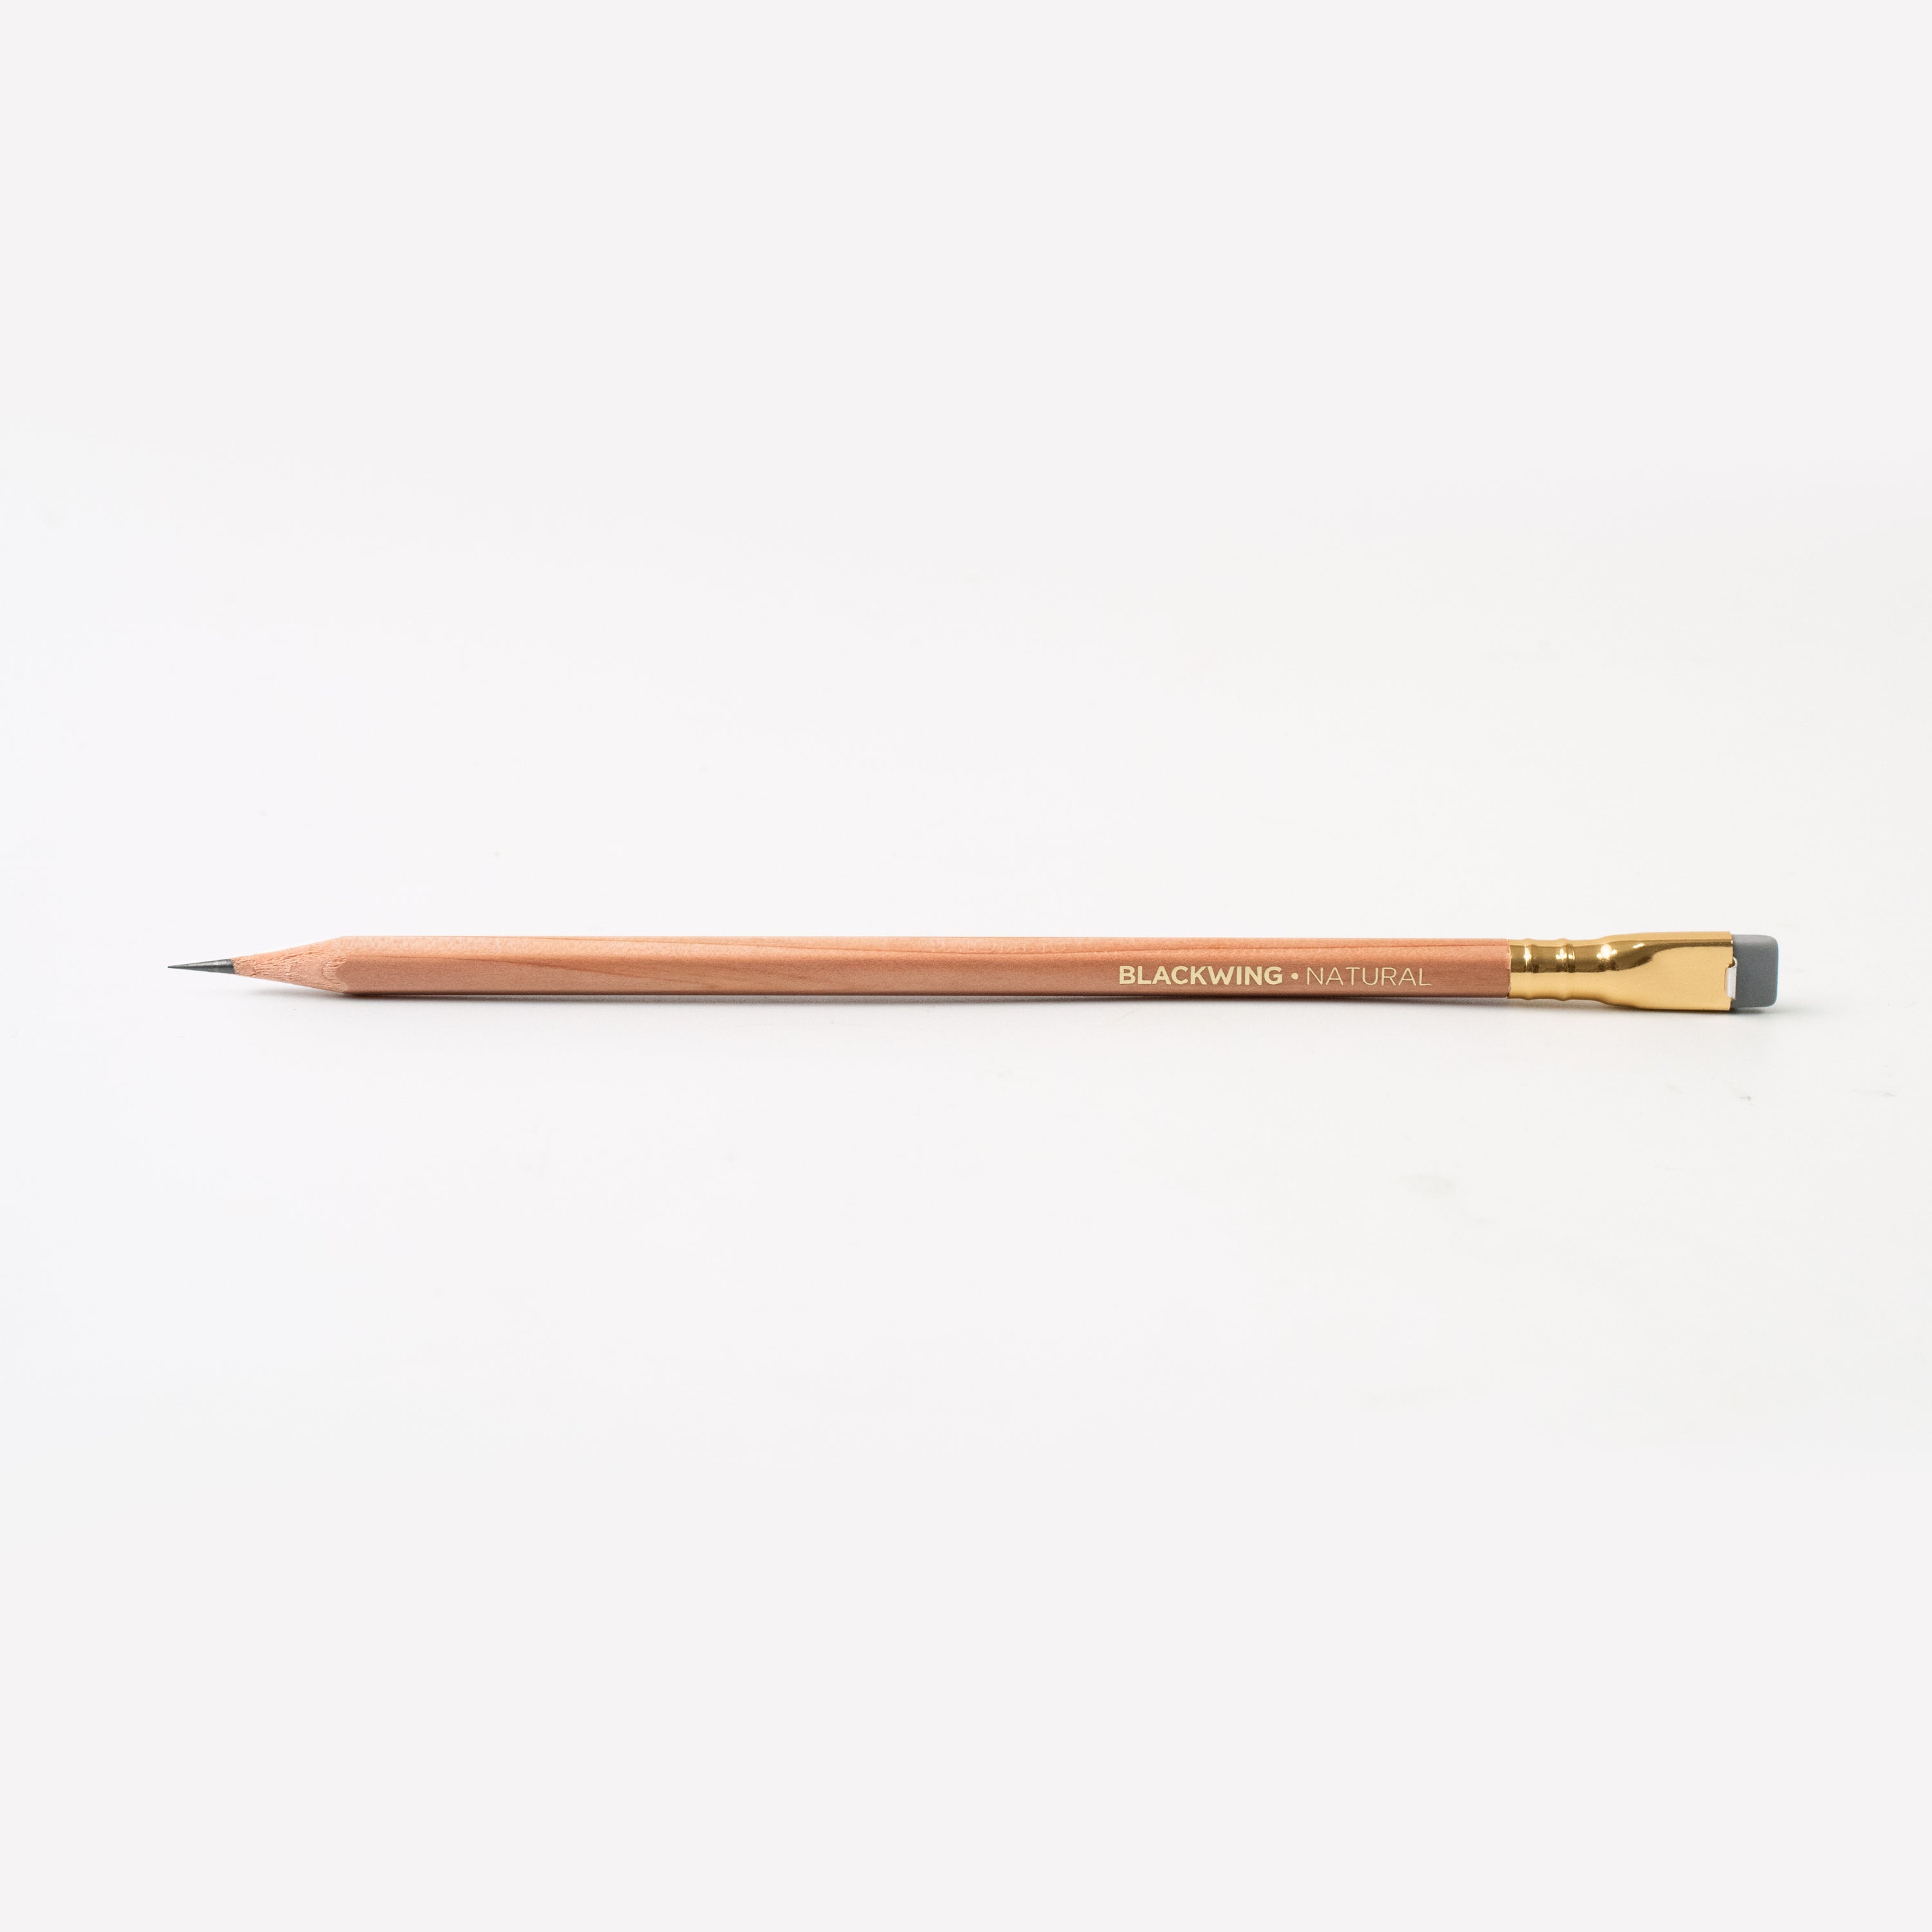 Blackwing Natural - SINGLE |  Extra Firm Black Graphite with Eraser - Lifestory